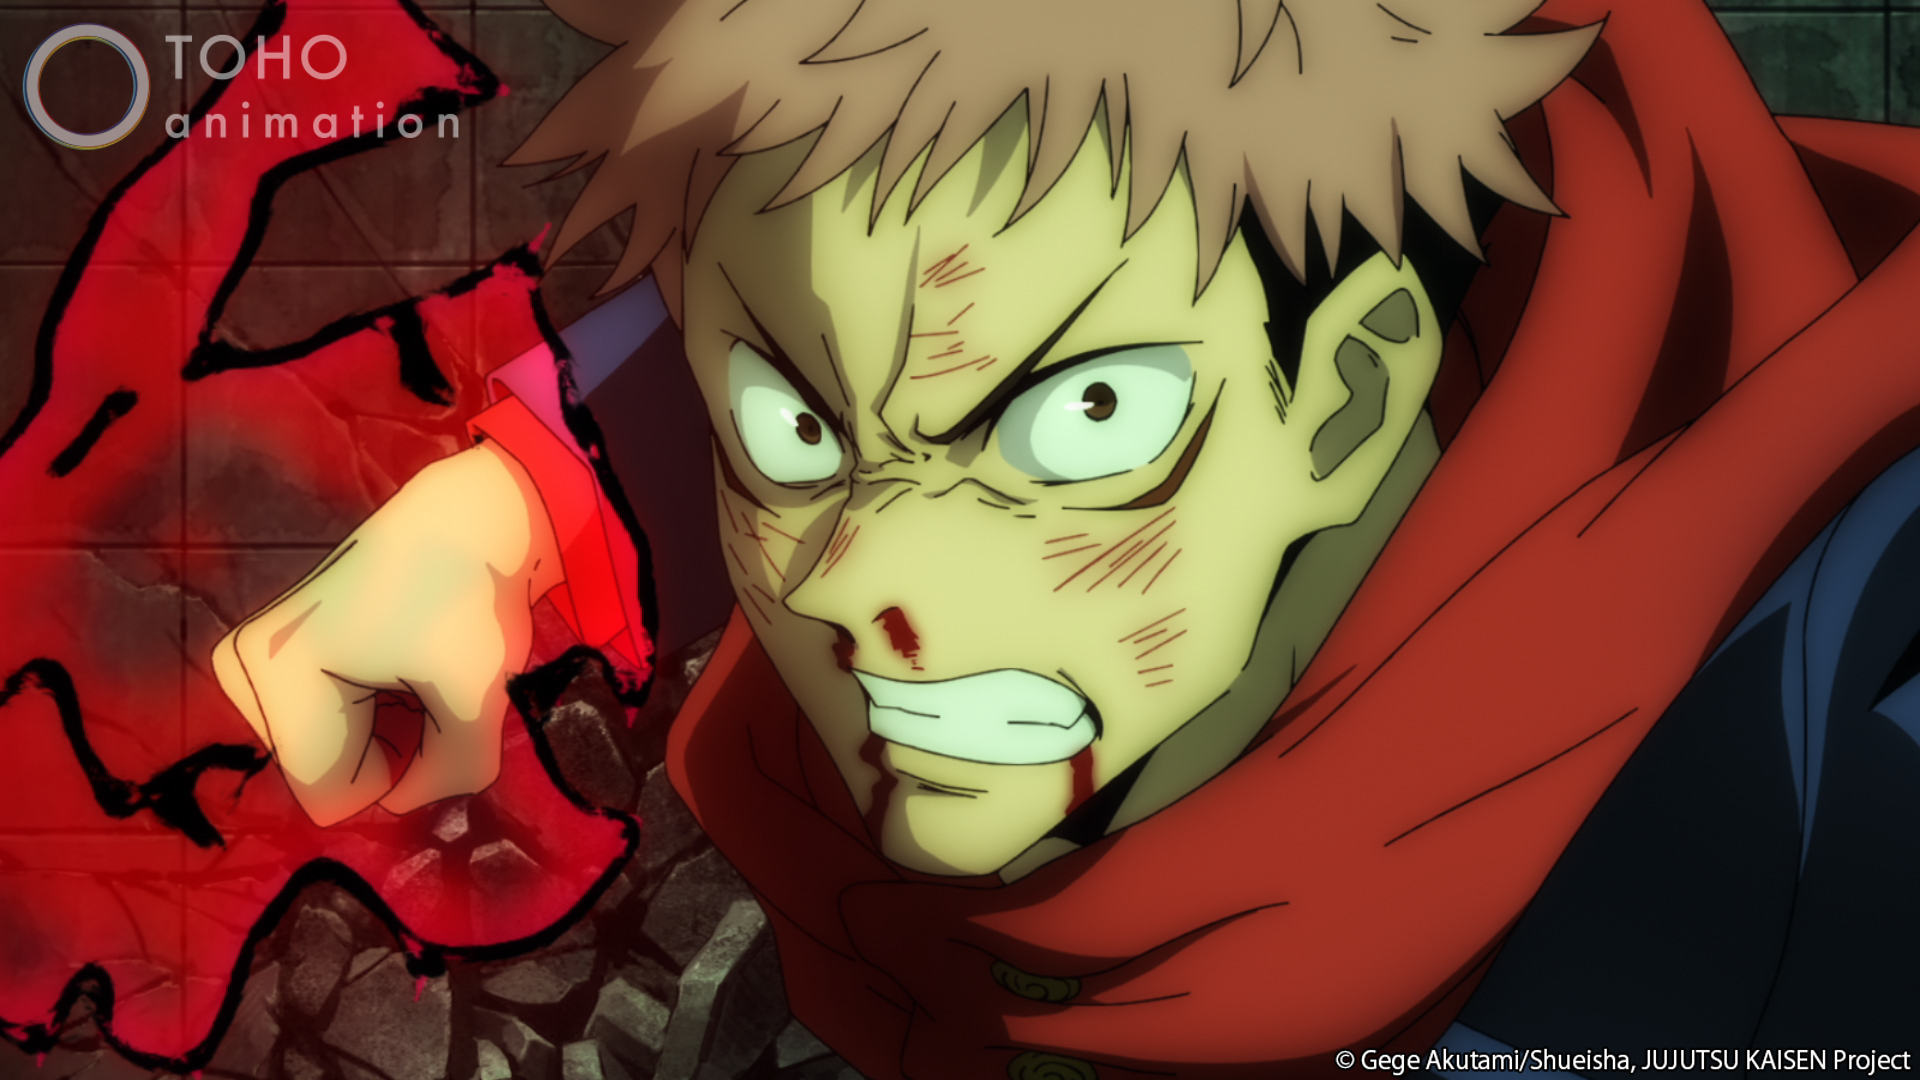 Yuji Itadori in season 1 of the 'Jujutsu Kaisen' anime. He's wielding cursed energy, and there's blood on his face.